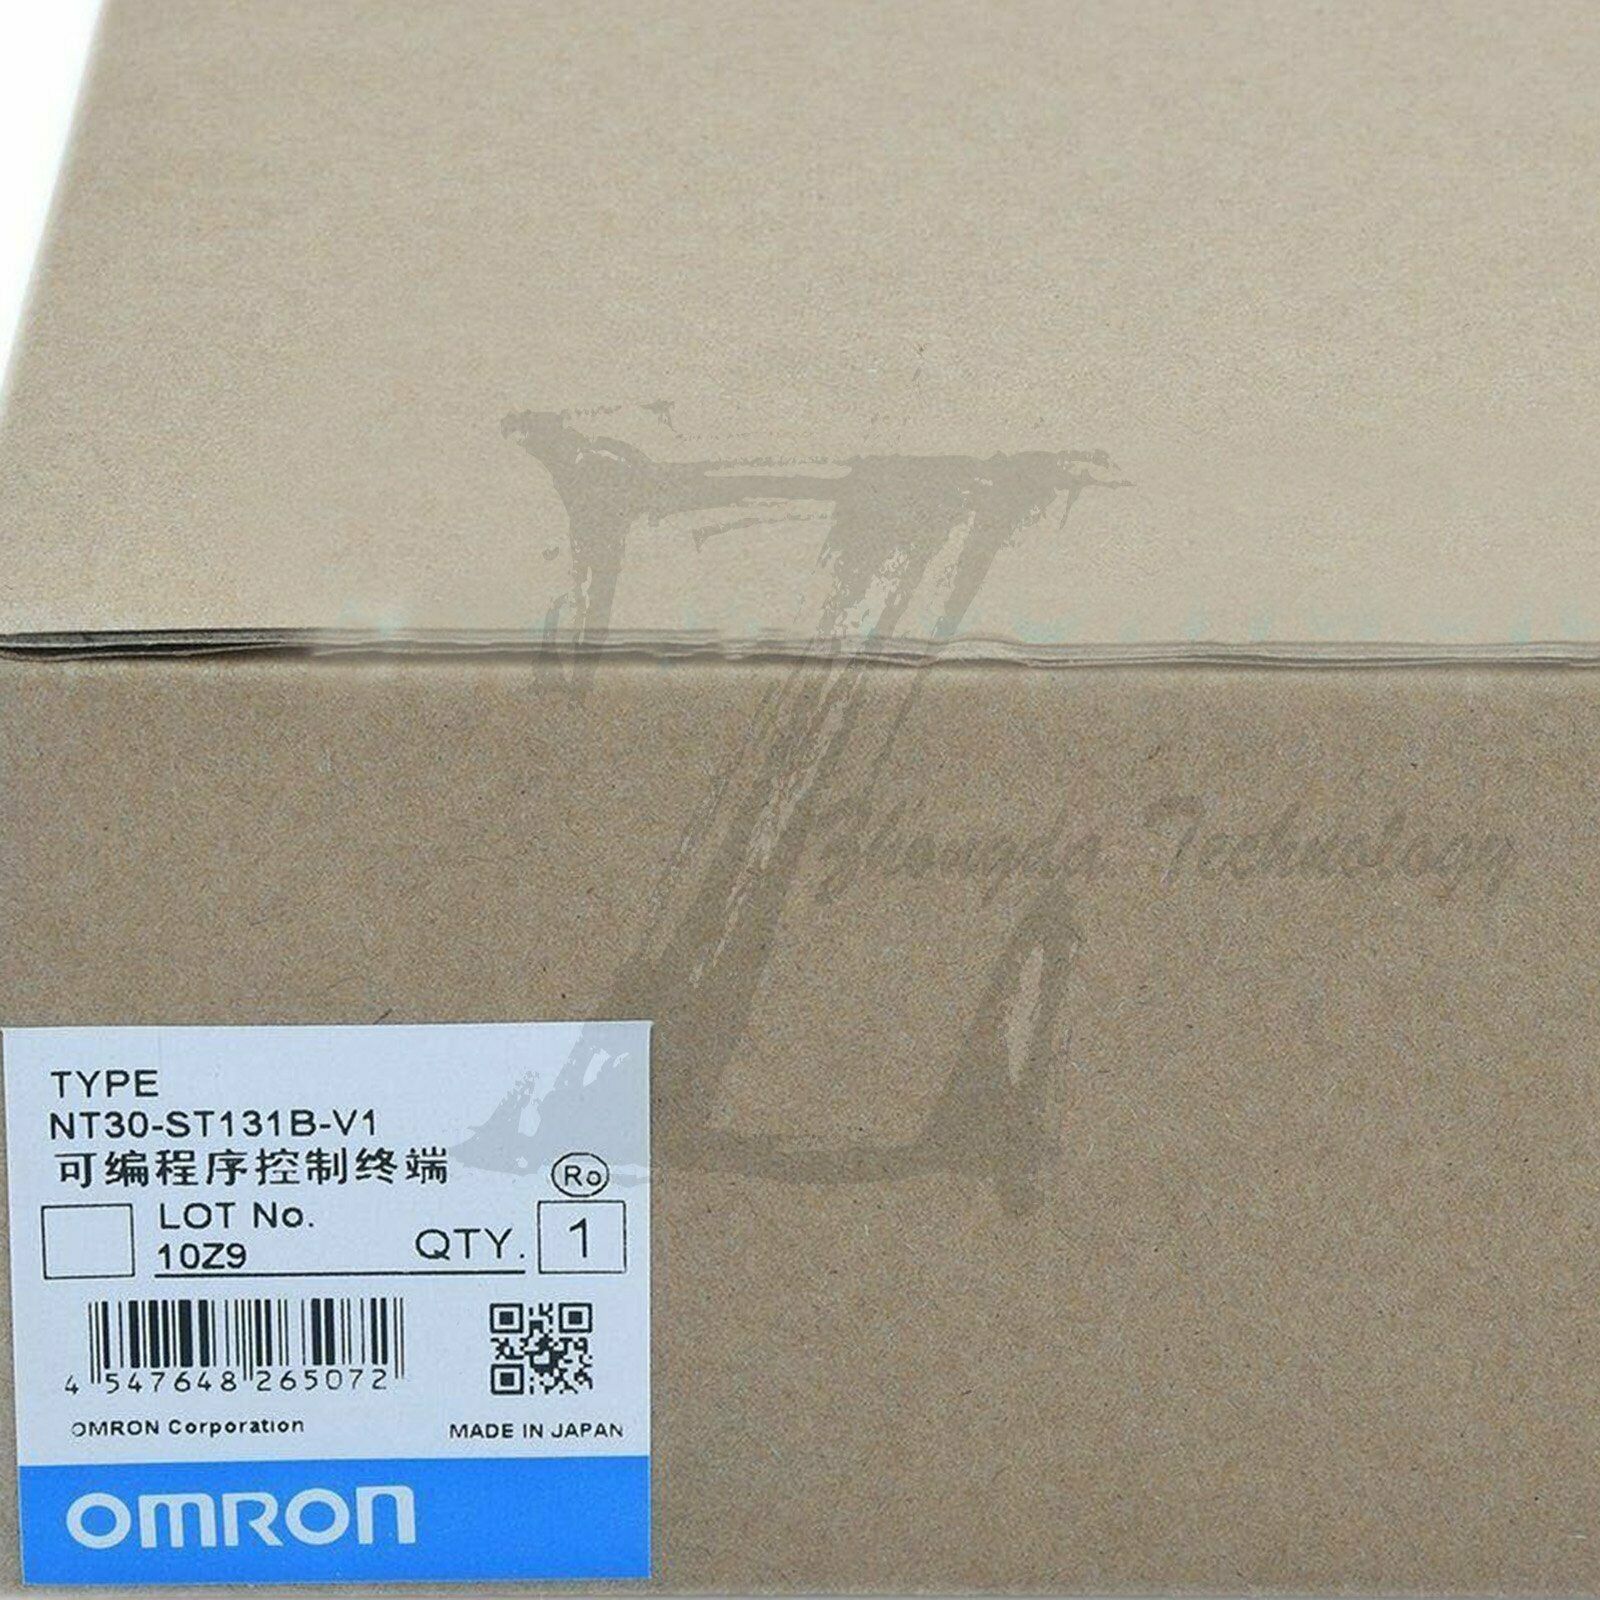 1pc new Omron NT30-ST131B-V1 one-year warranty KOEED 101-200, 80%, import_2020_10_10_031751, Omron, Other